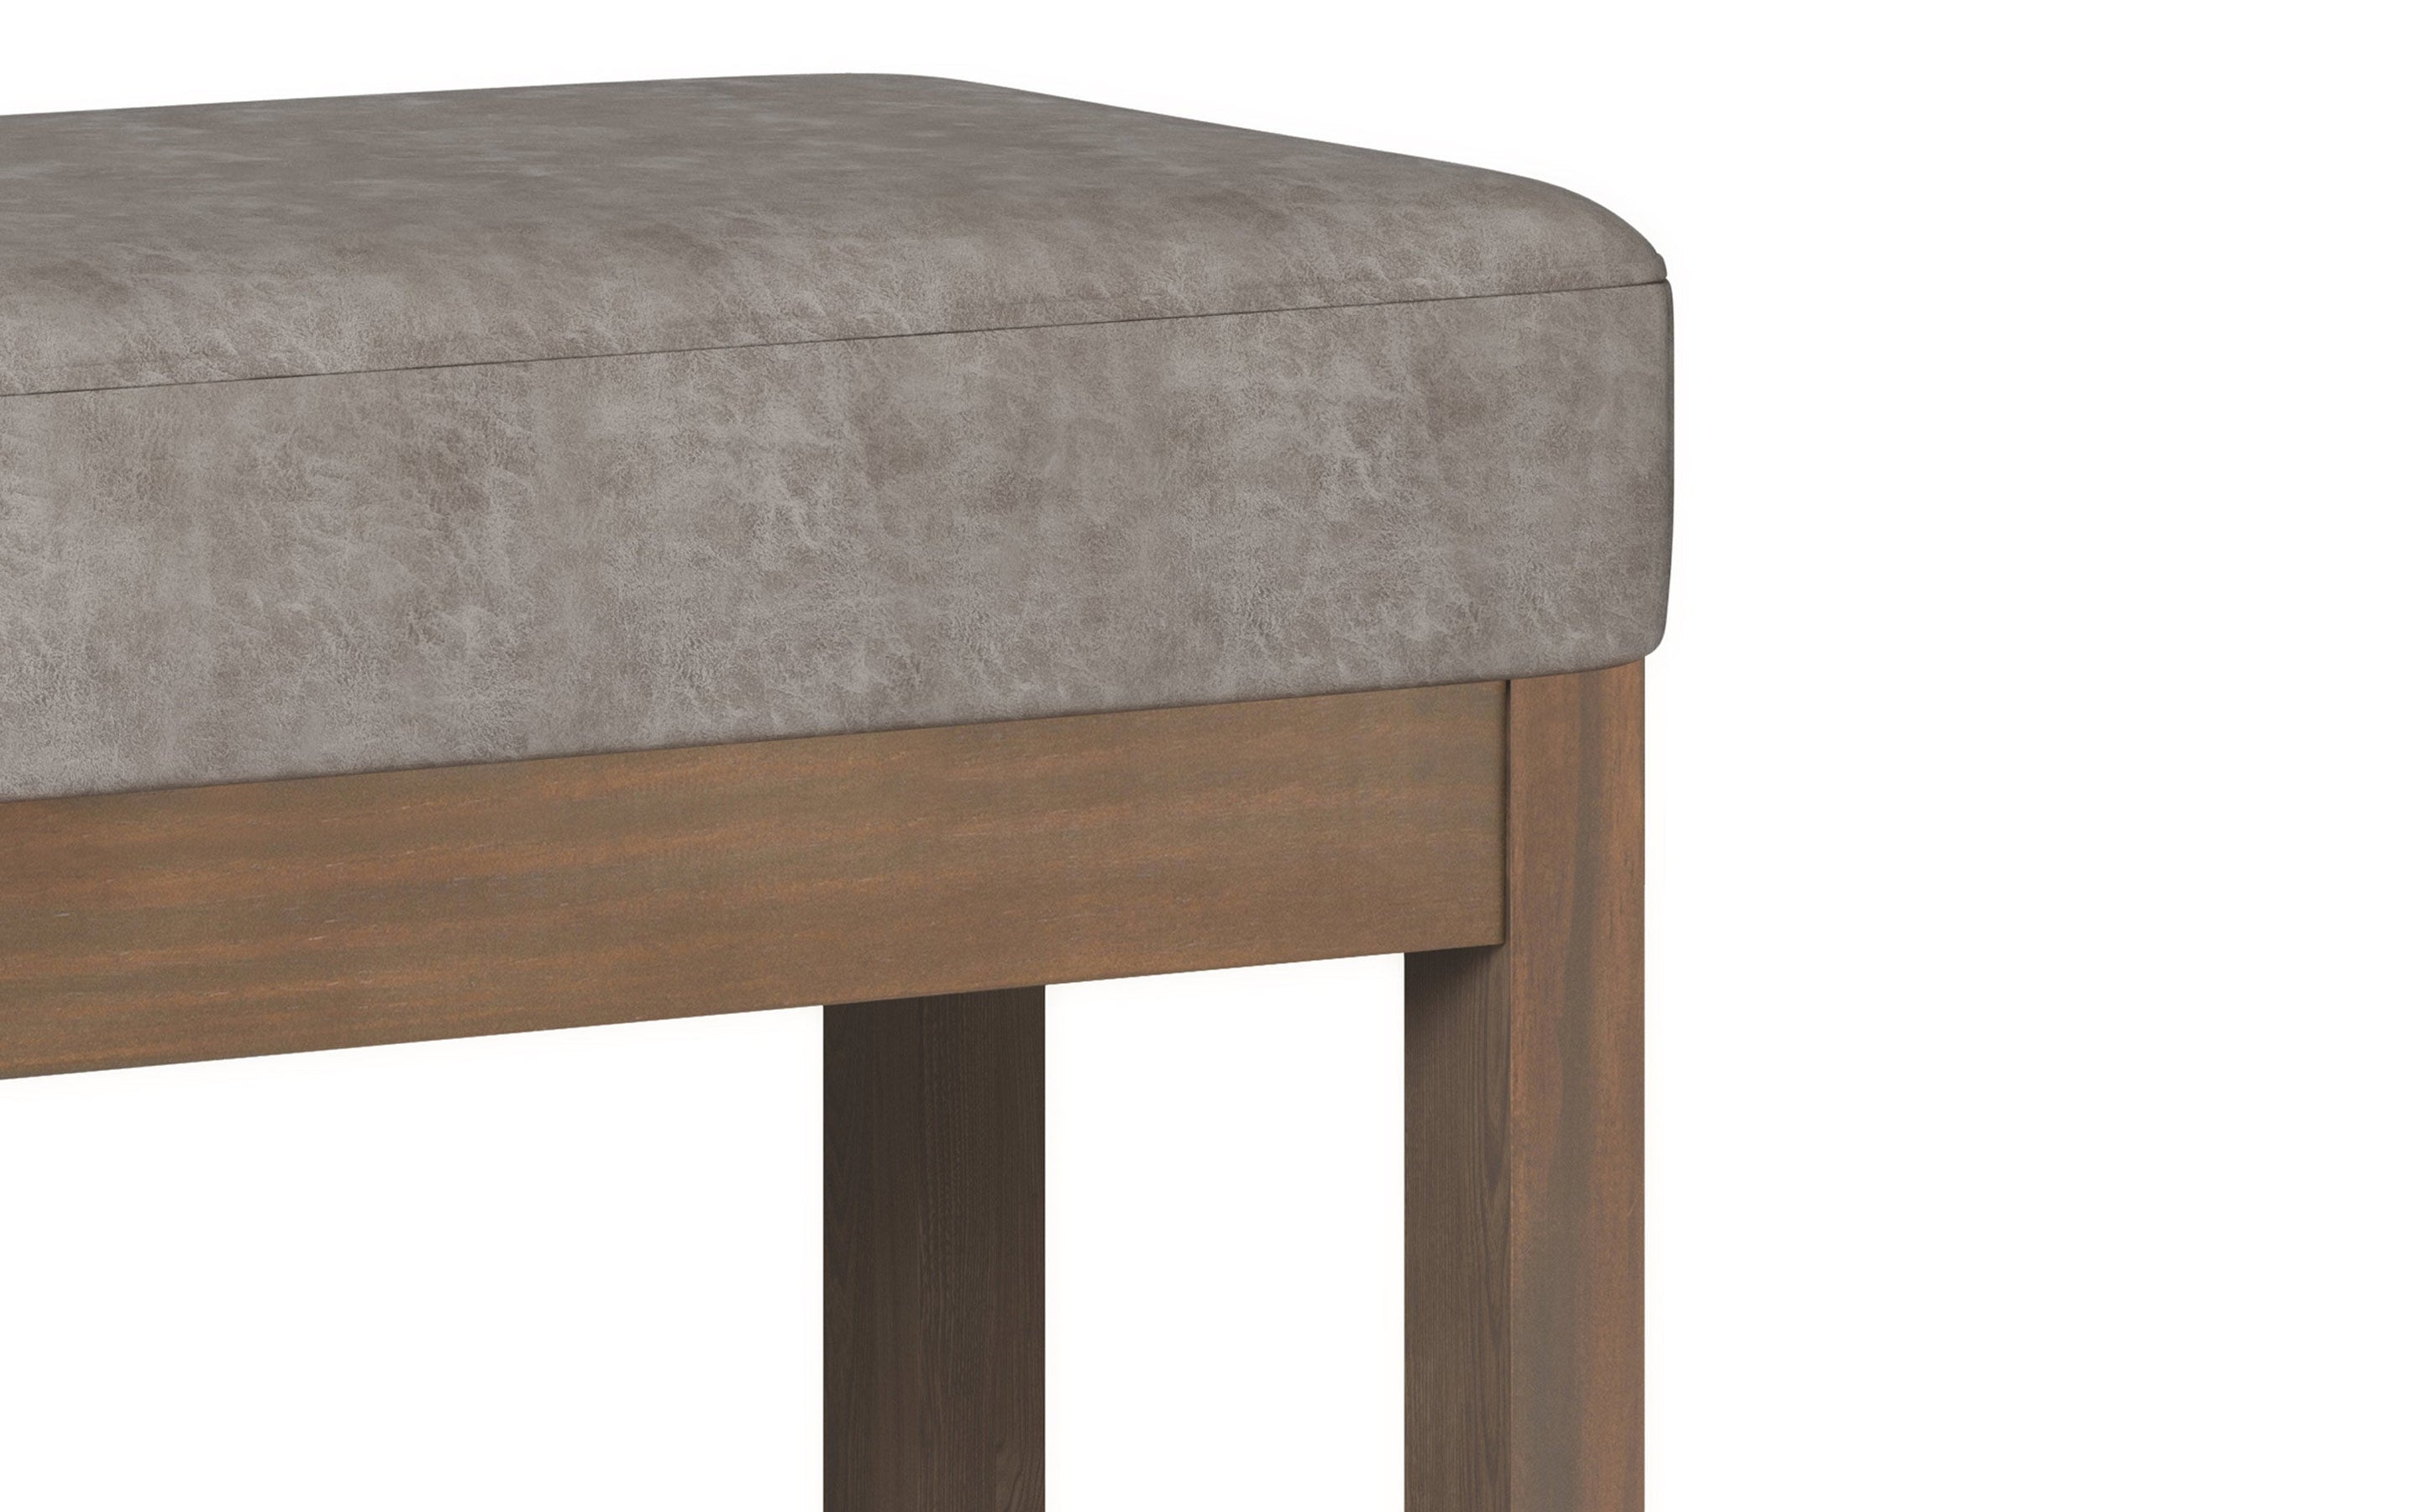 Distressed Grey Taupe Distressed Vegan Leather| Milltown Footstool Small Ottoman Bench